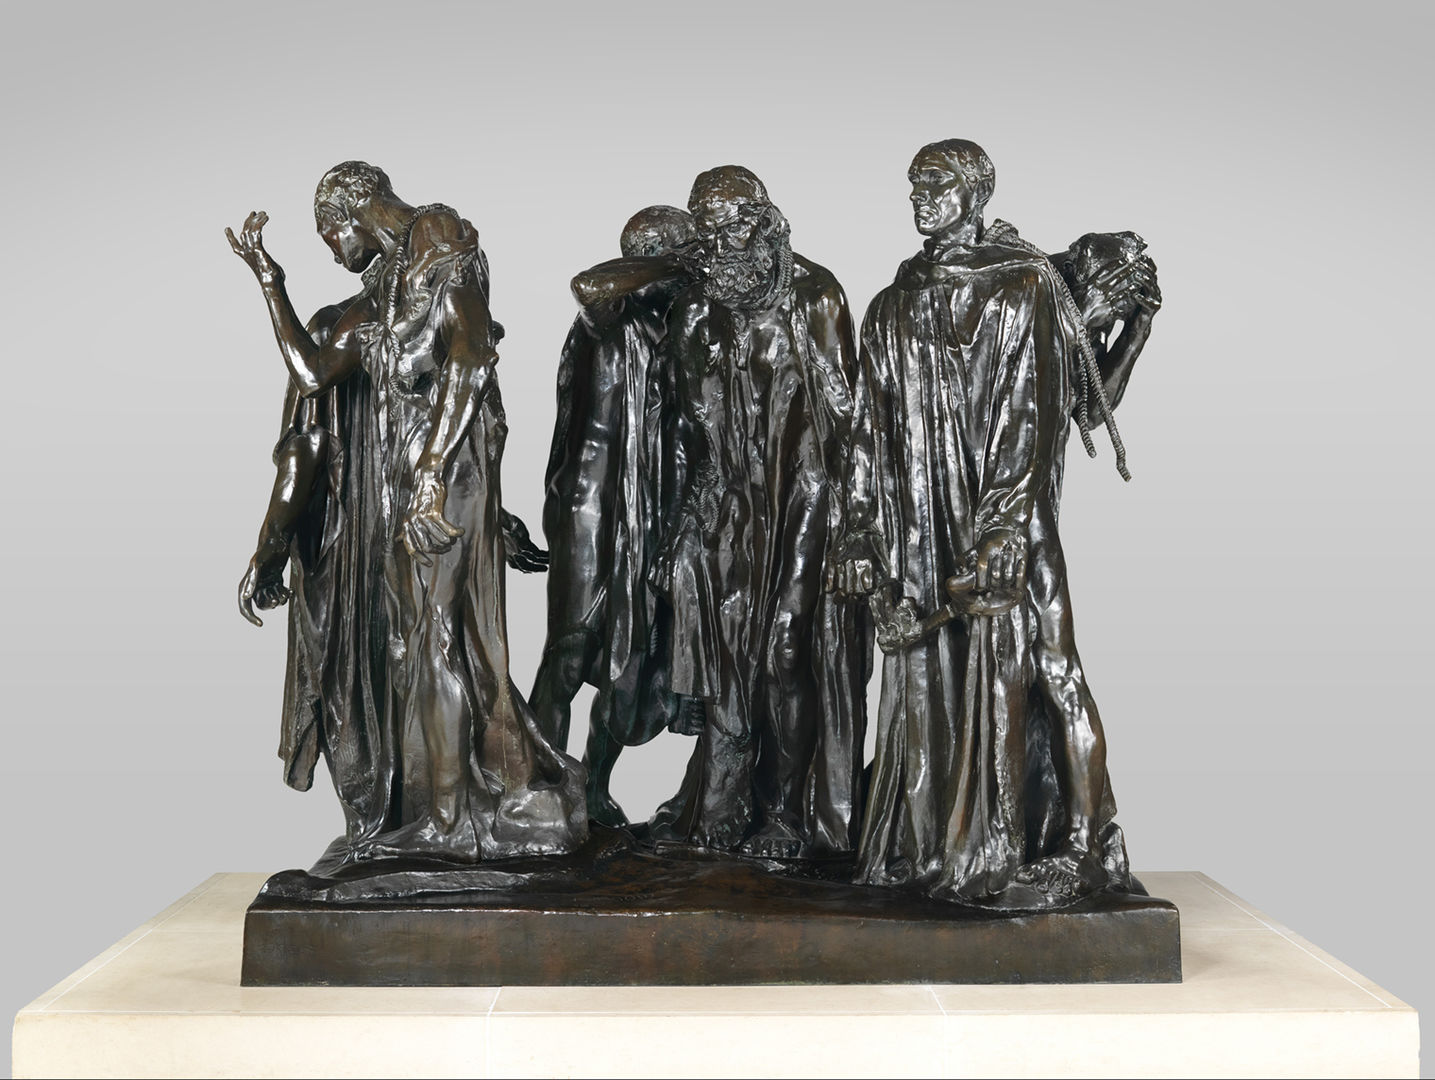 An over-life size bronze sculpture of a group of men chained together in a group, walking in a circle